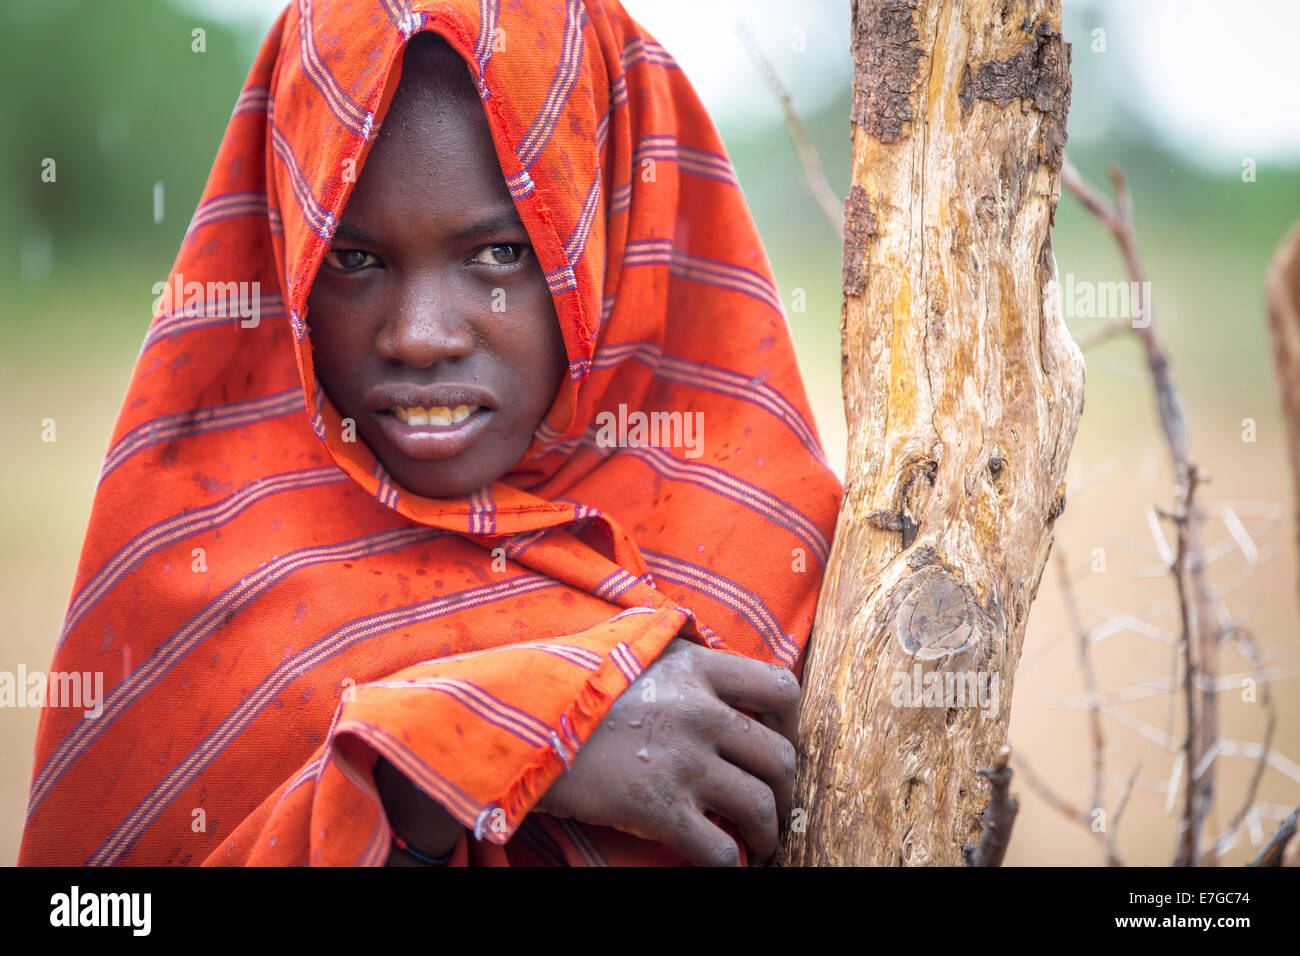 Dassanetch girl in southern Ethiopia in rain, Ethiopia 13 May 2014. Stock Photo